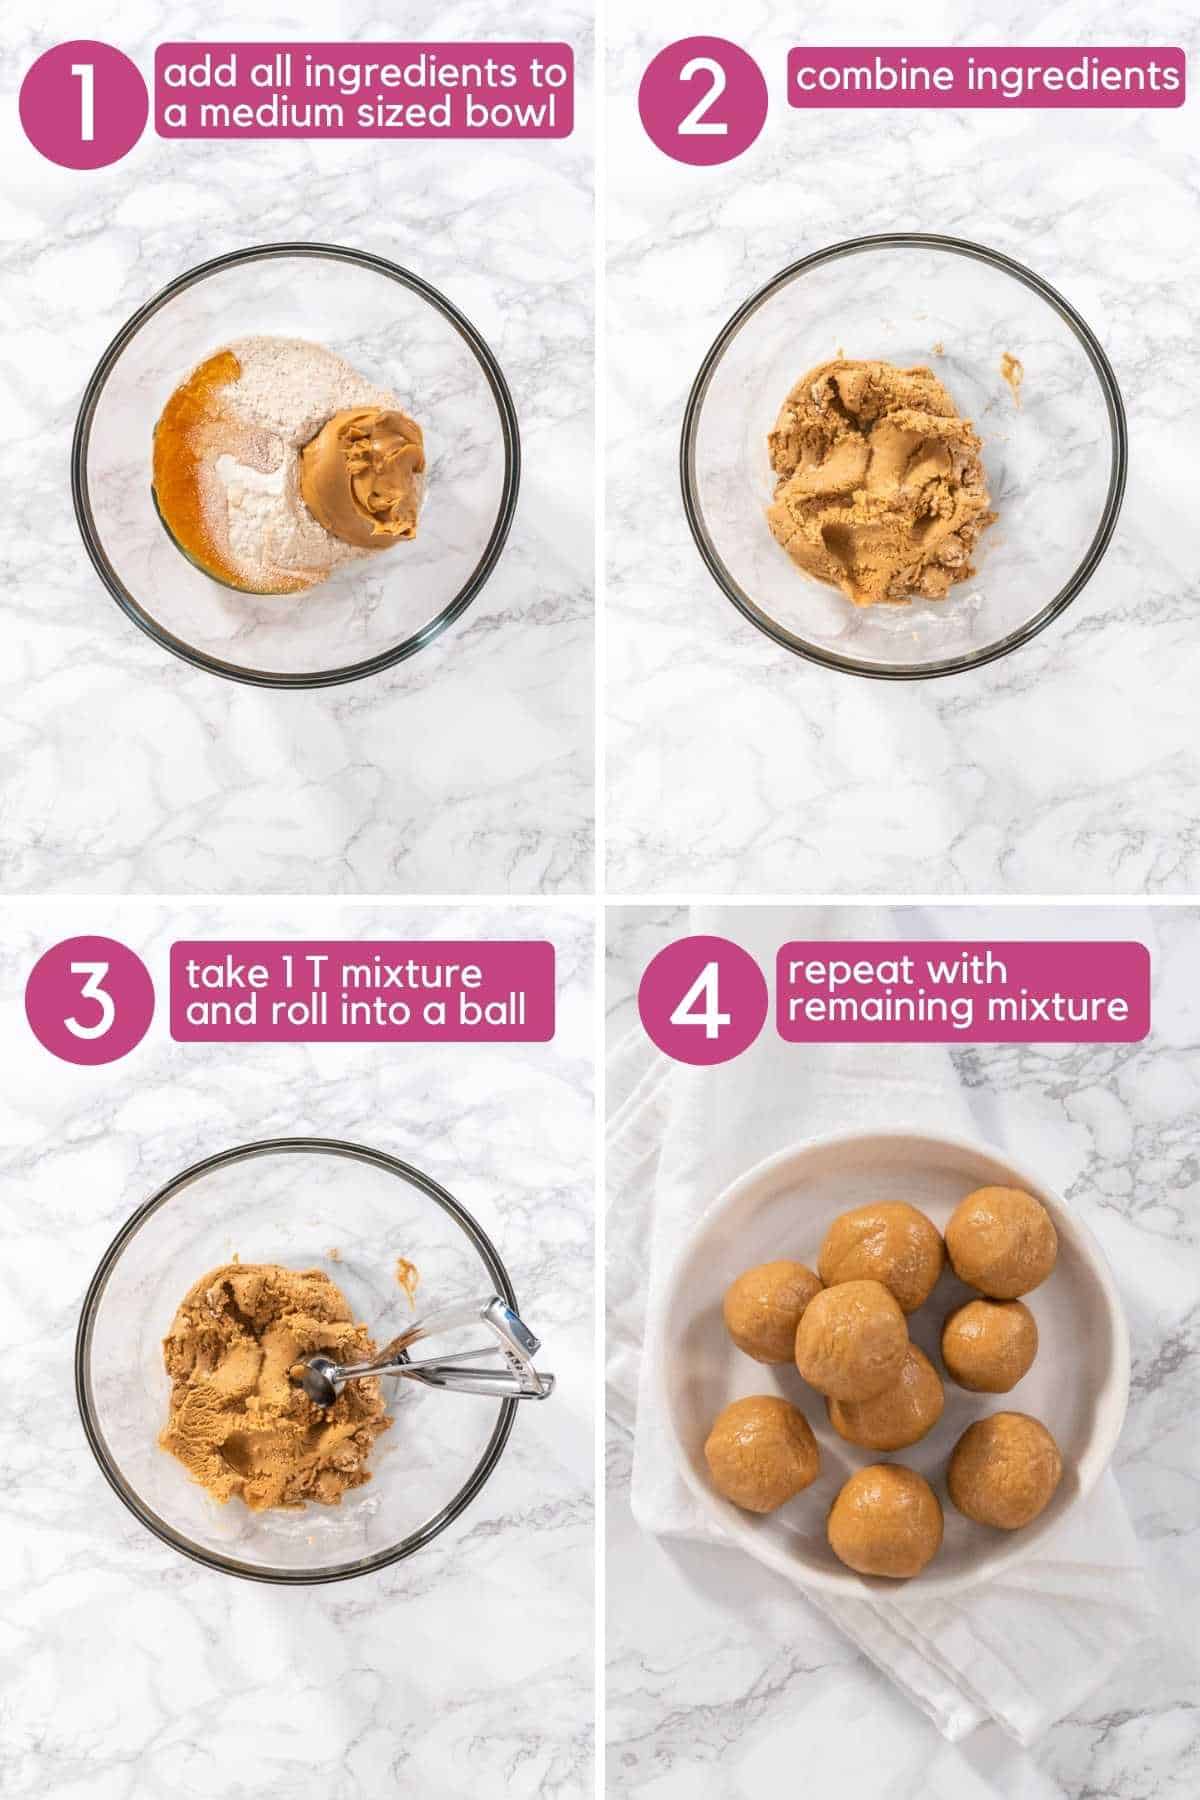 How to make peanut butter balls without chocolate coating.